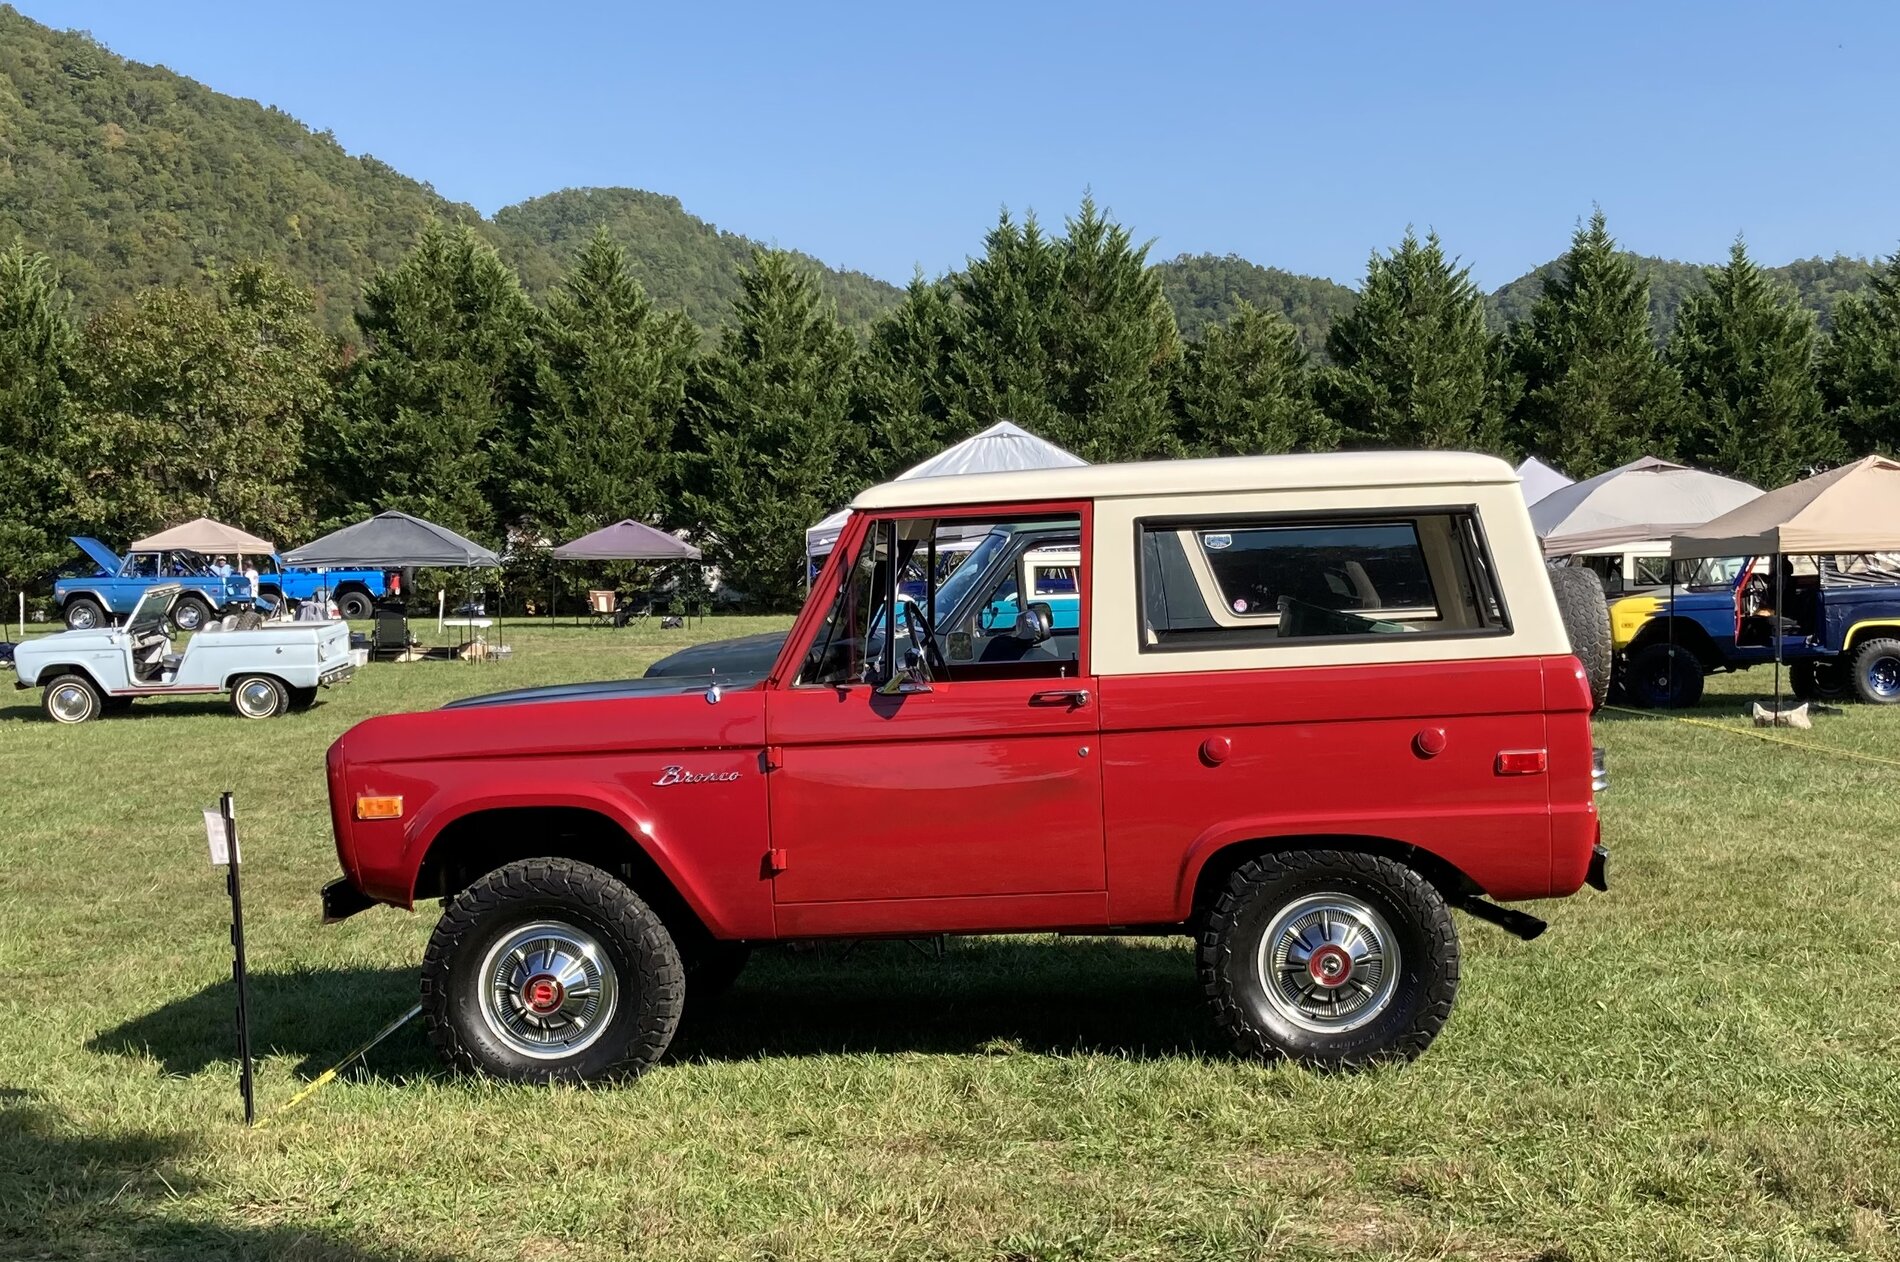 Ford Bronco My thoughts on 2 door at Super Cel F4691E69-F535-4065-8DC1-8F69E96C6083